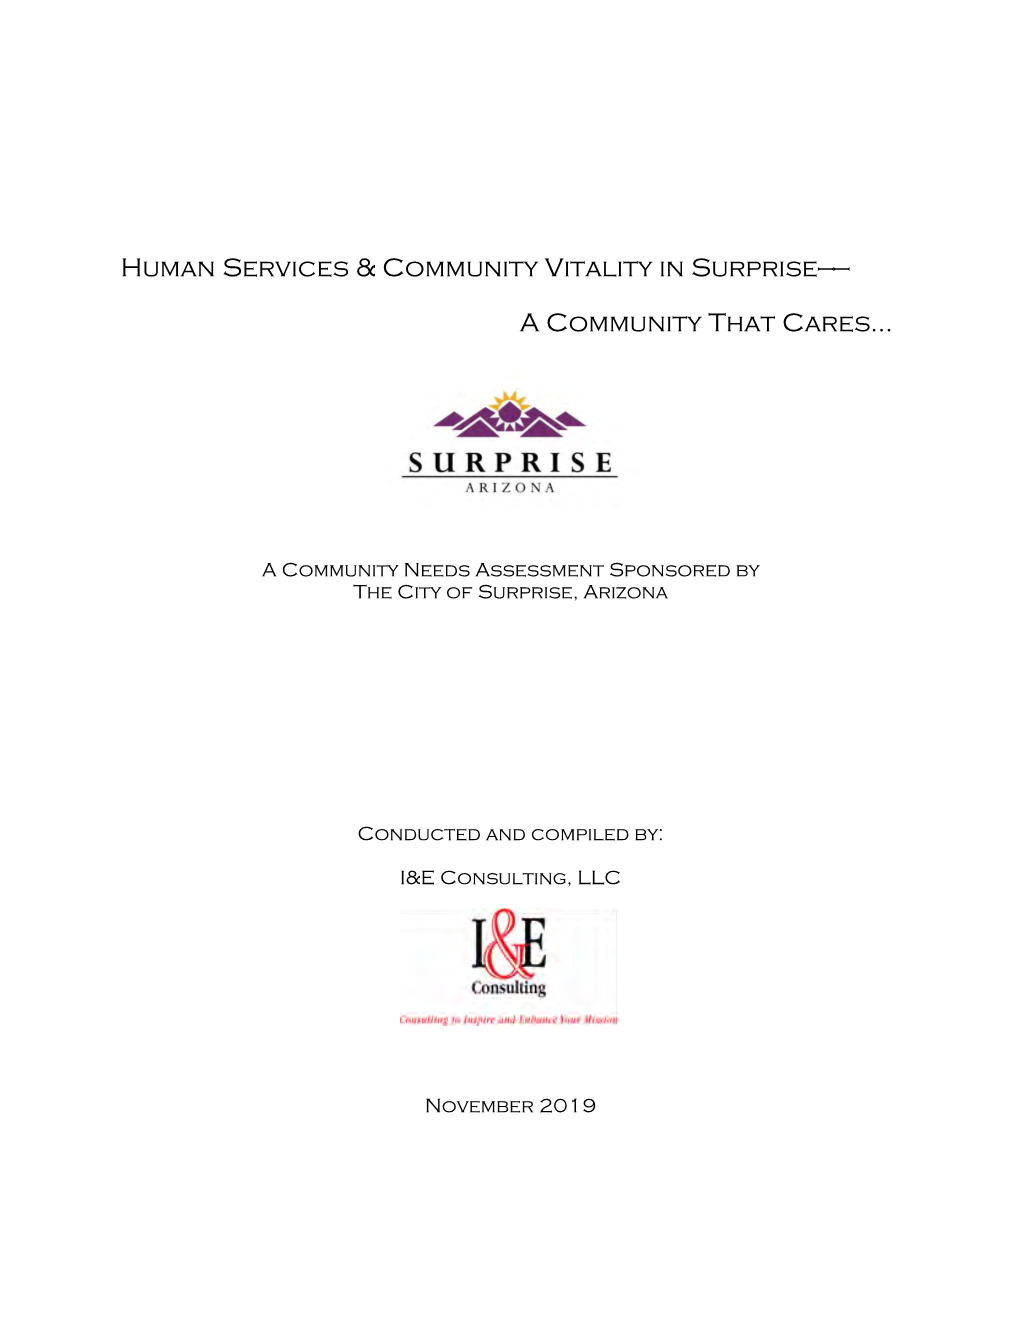 Human Services & Community Vitality in Surprise